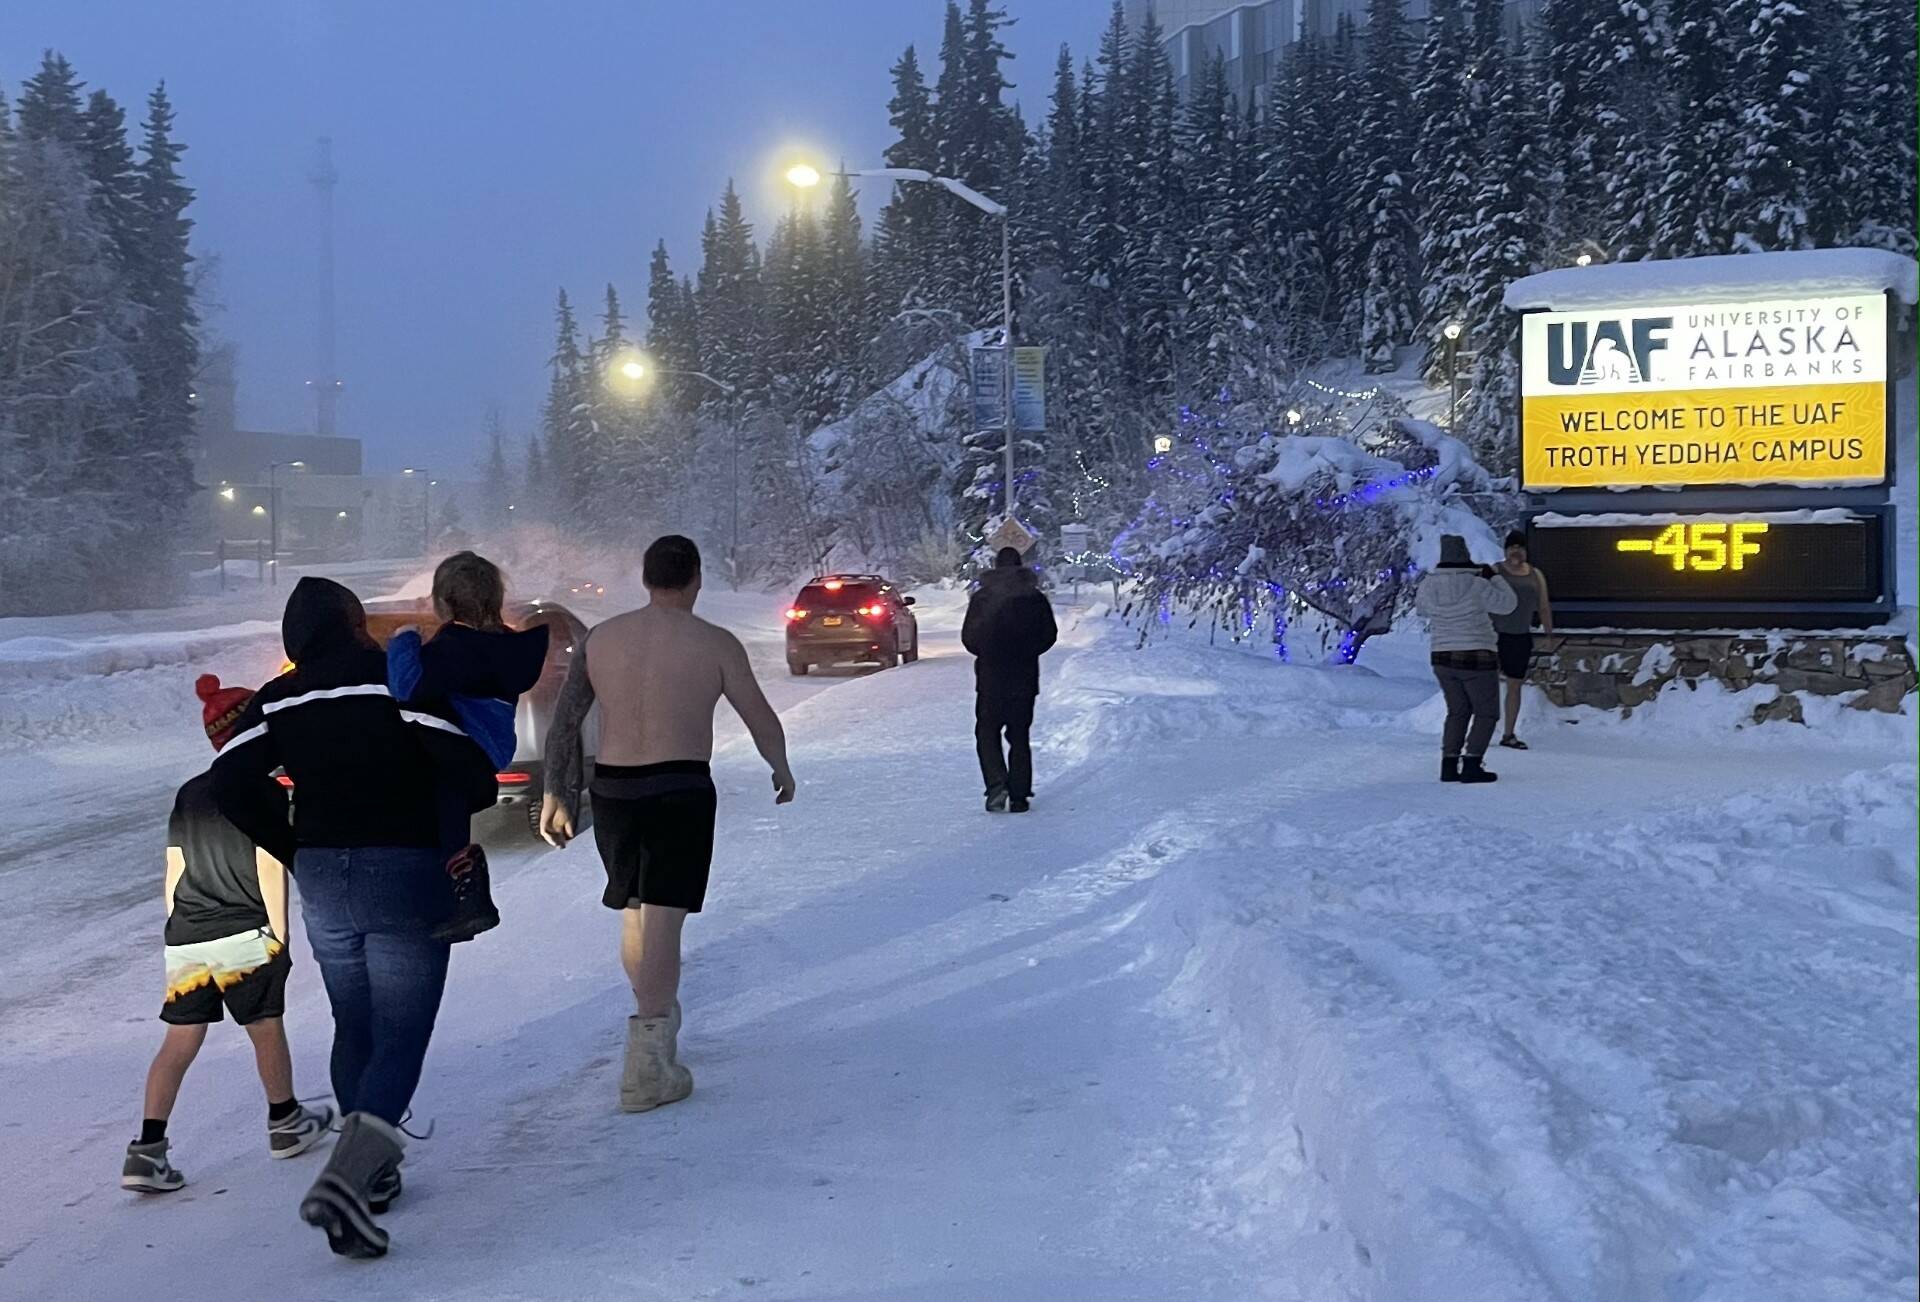 Fairbanks residents engage in a favorite cold-weather activity of taking photographs of themselves in front of the University of Alaska Fairbanks time-and-temperature sign on the morning of Jan. 27, 2024. (Photo by Ned Rozell)